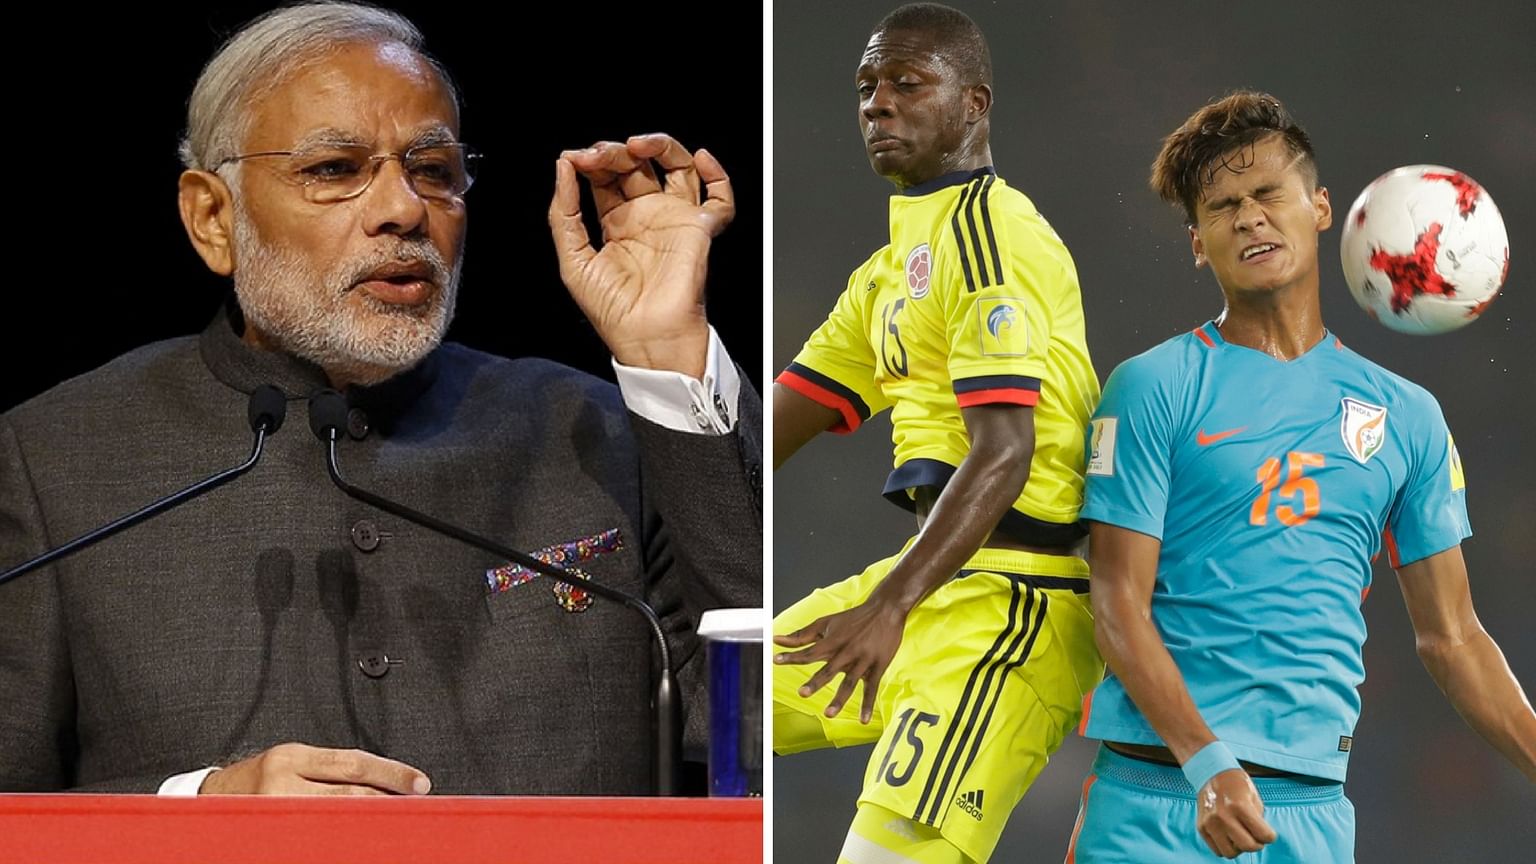 Narendra Modi said all teams displayed their best talent during the tournament held in India for the first time.